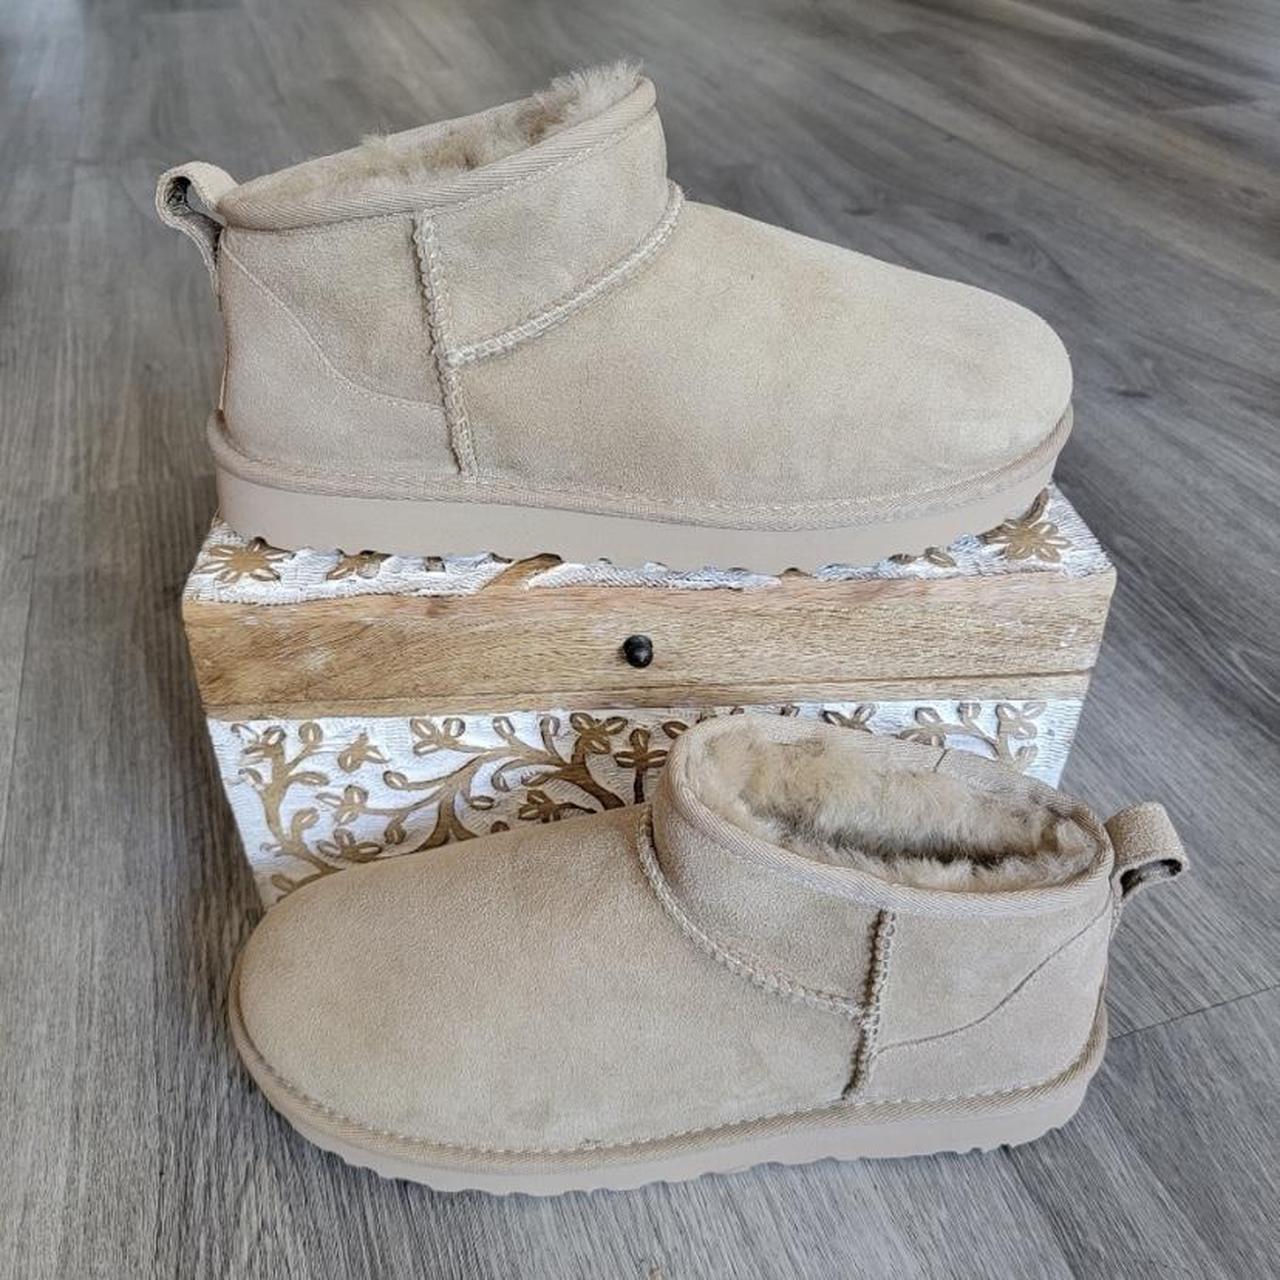 Womens SOLID COLOR uggs 65$ Variety of sizes Womens - Depop